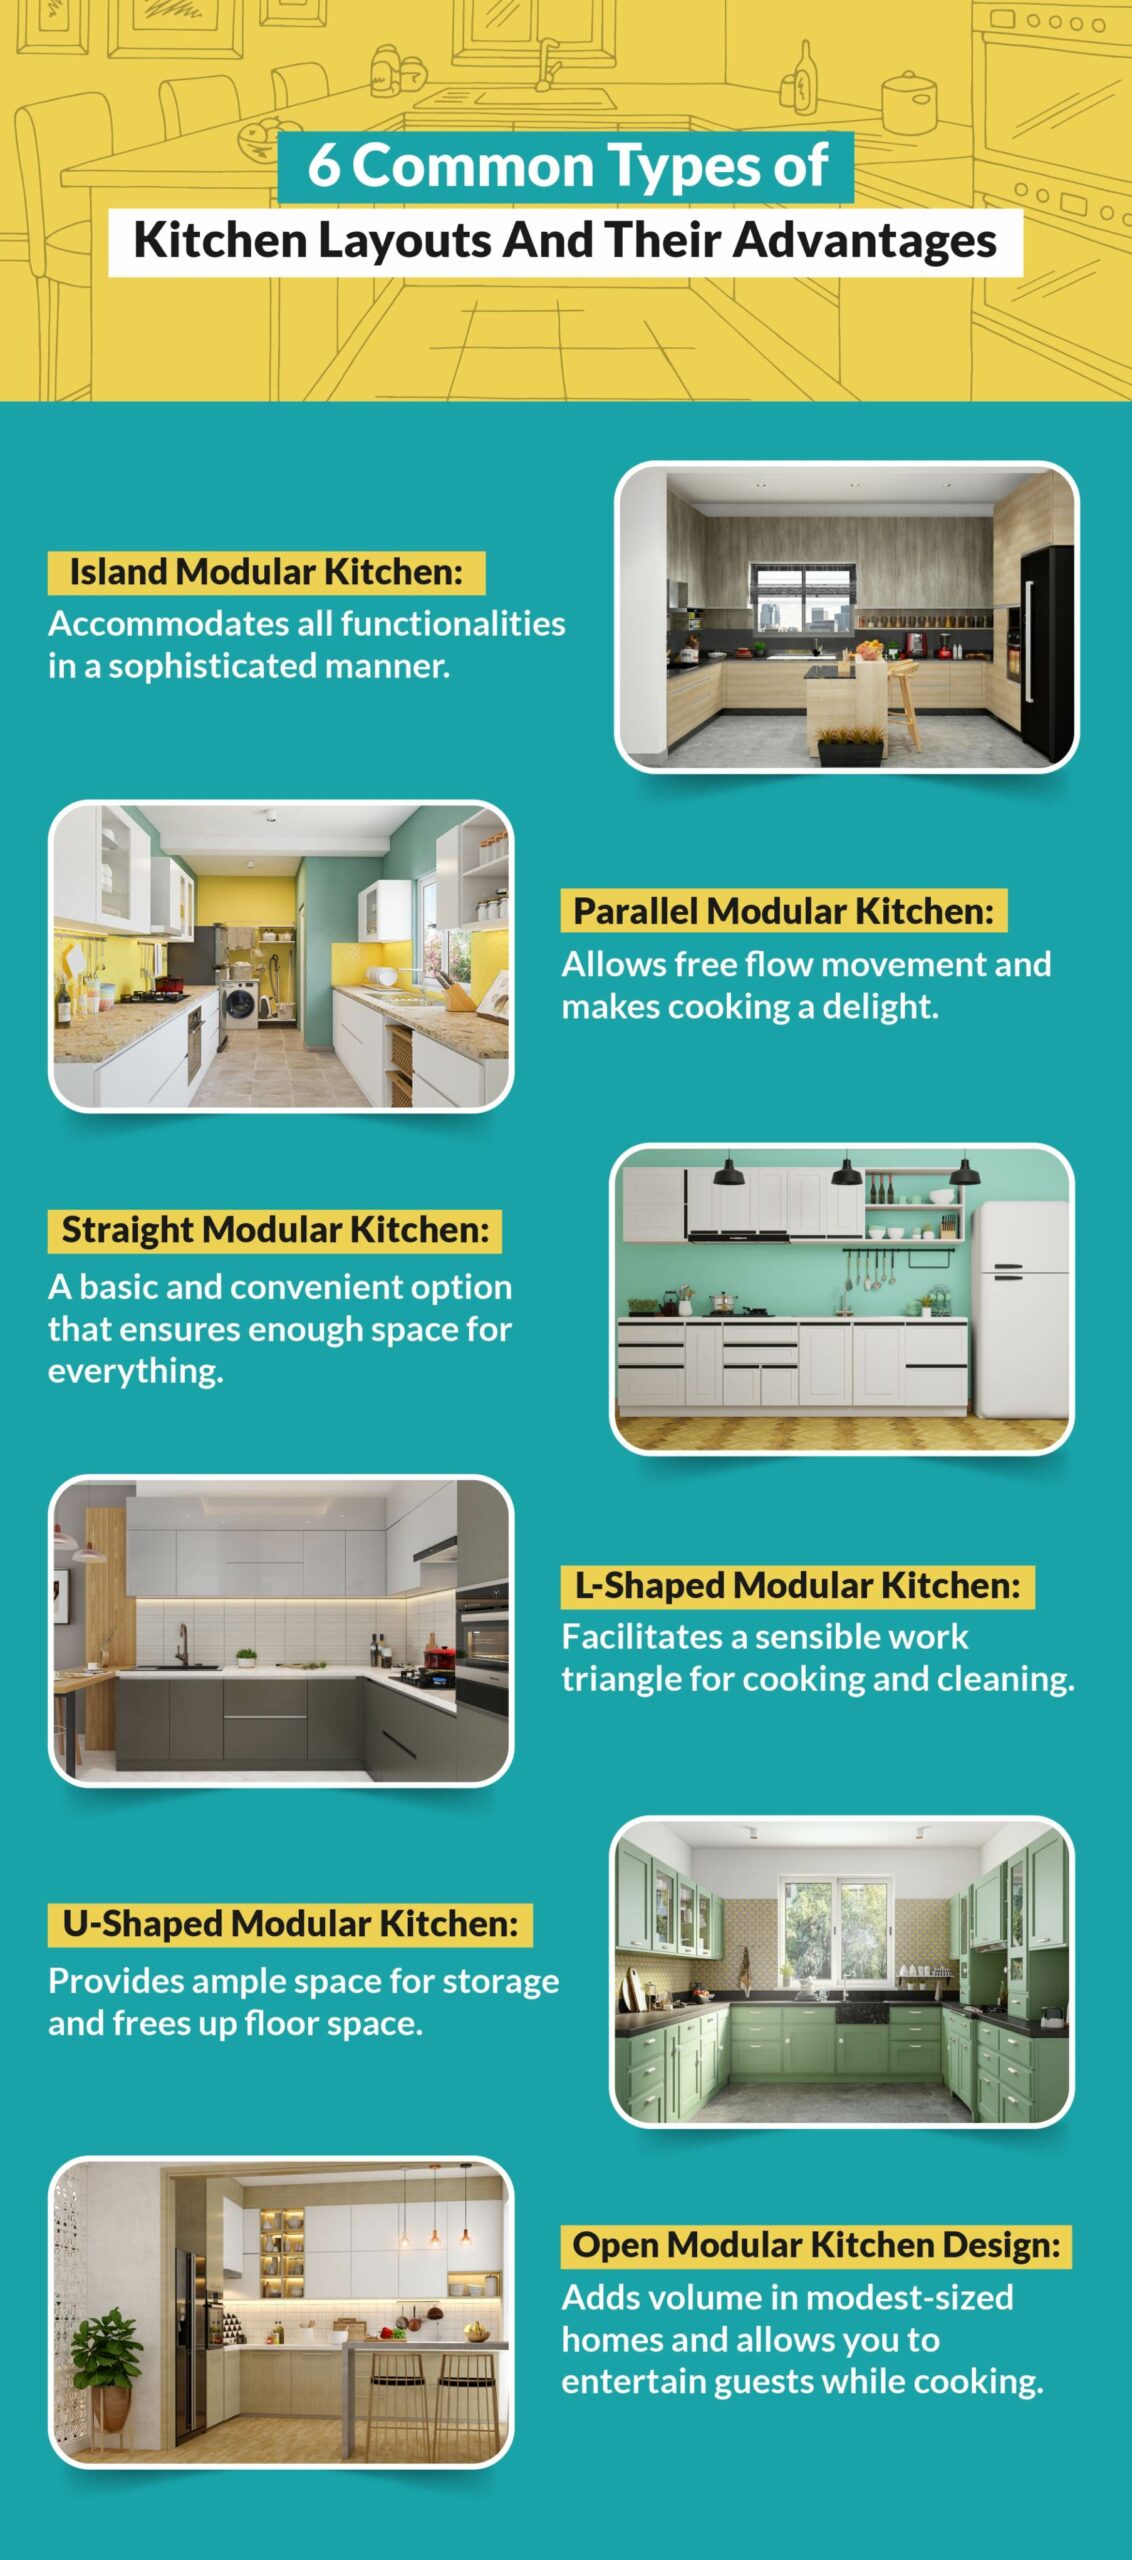 Different types of kitchen layouts - straight, l-shape, u-shape, parallel, open, island and galley kitchen